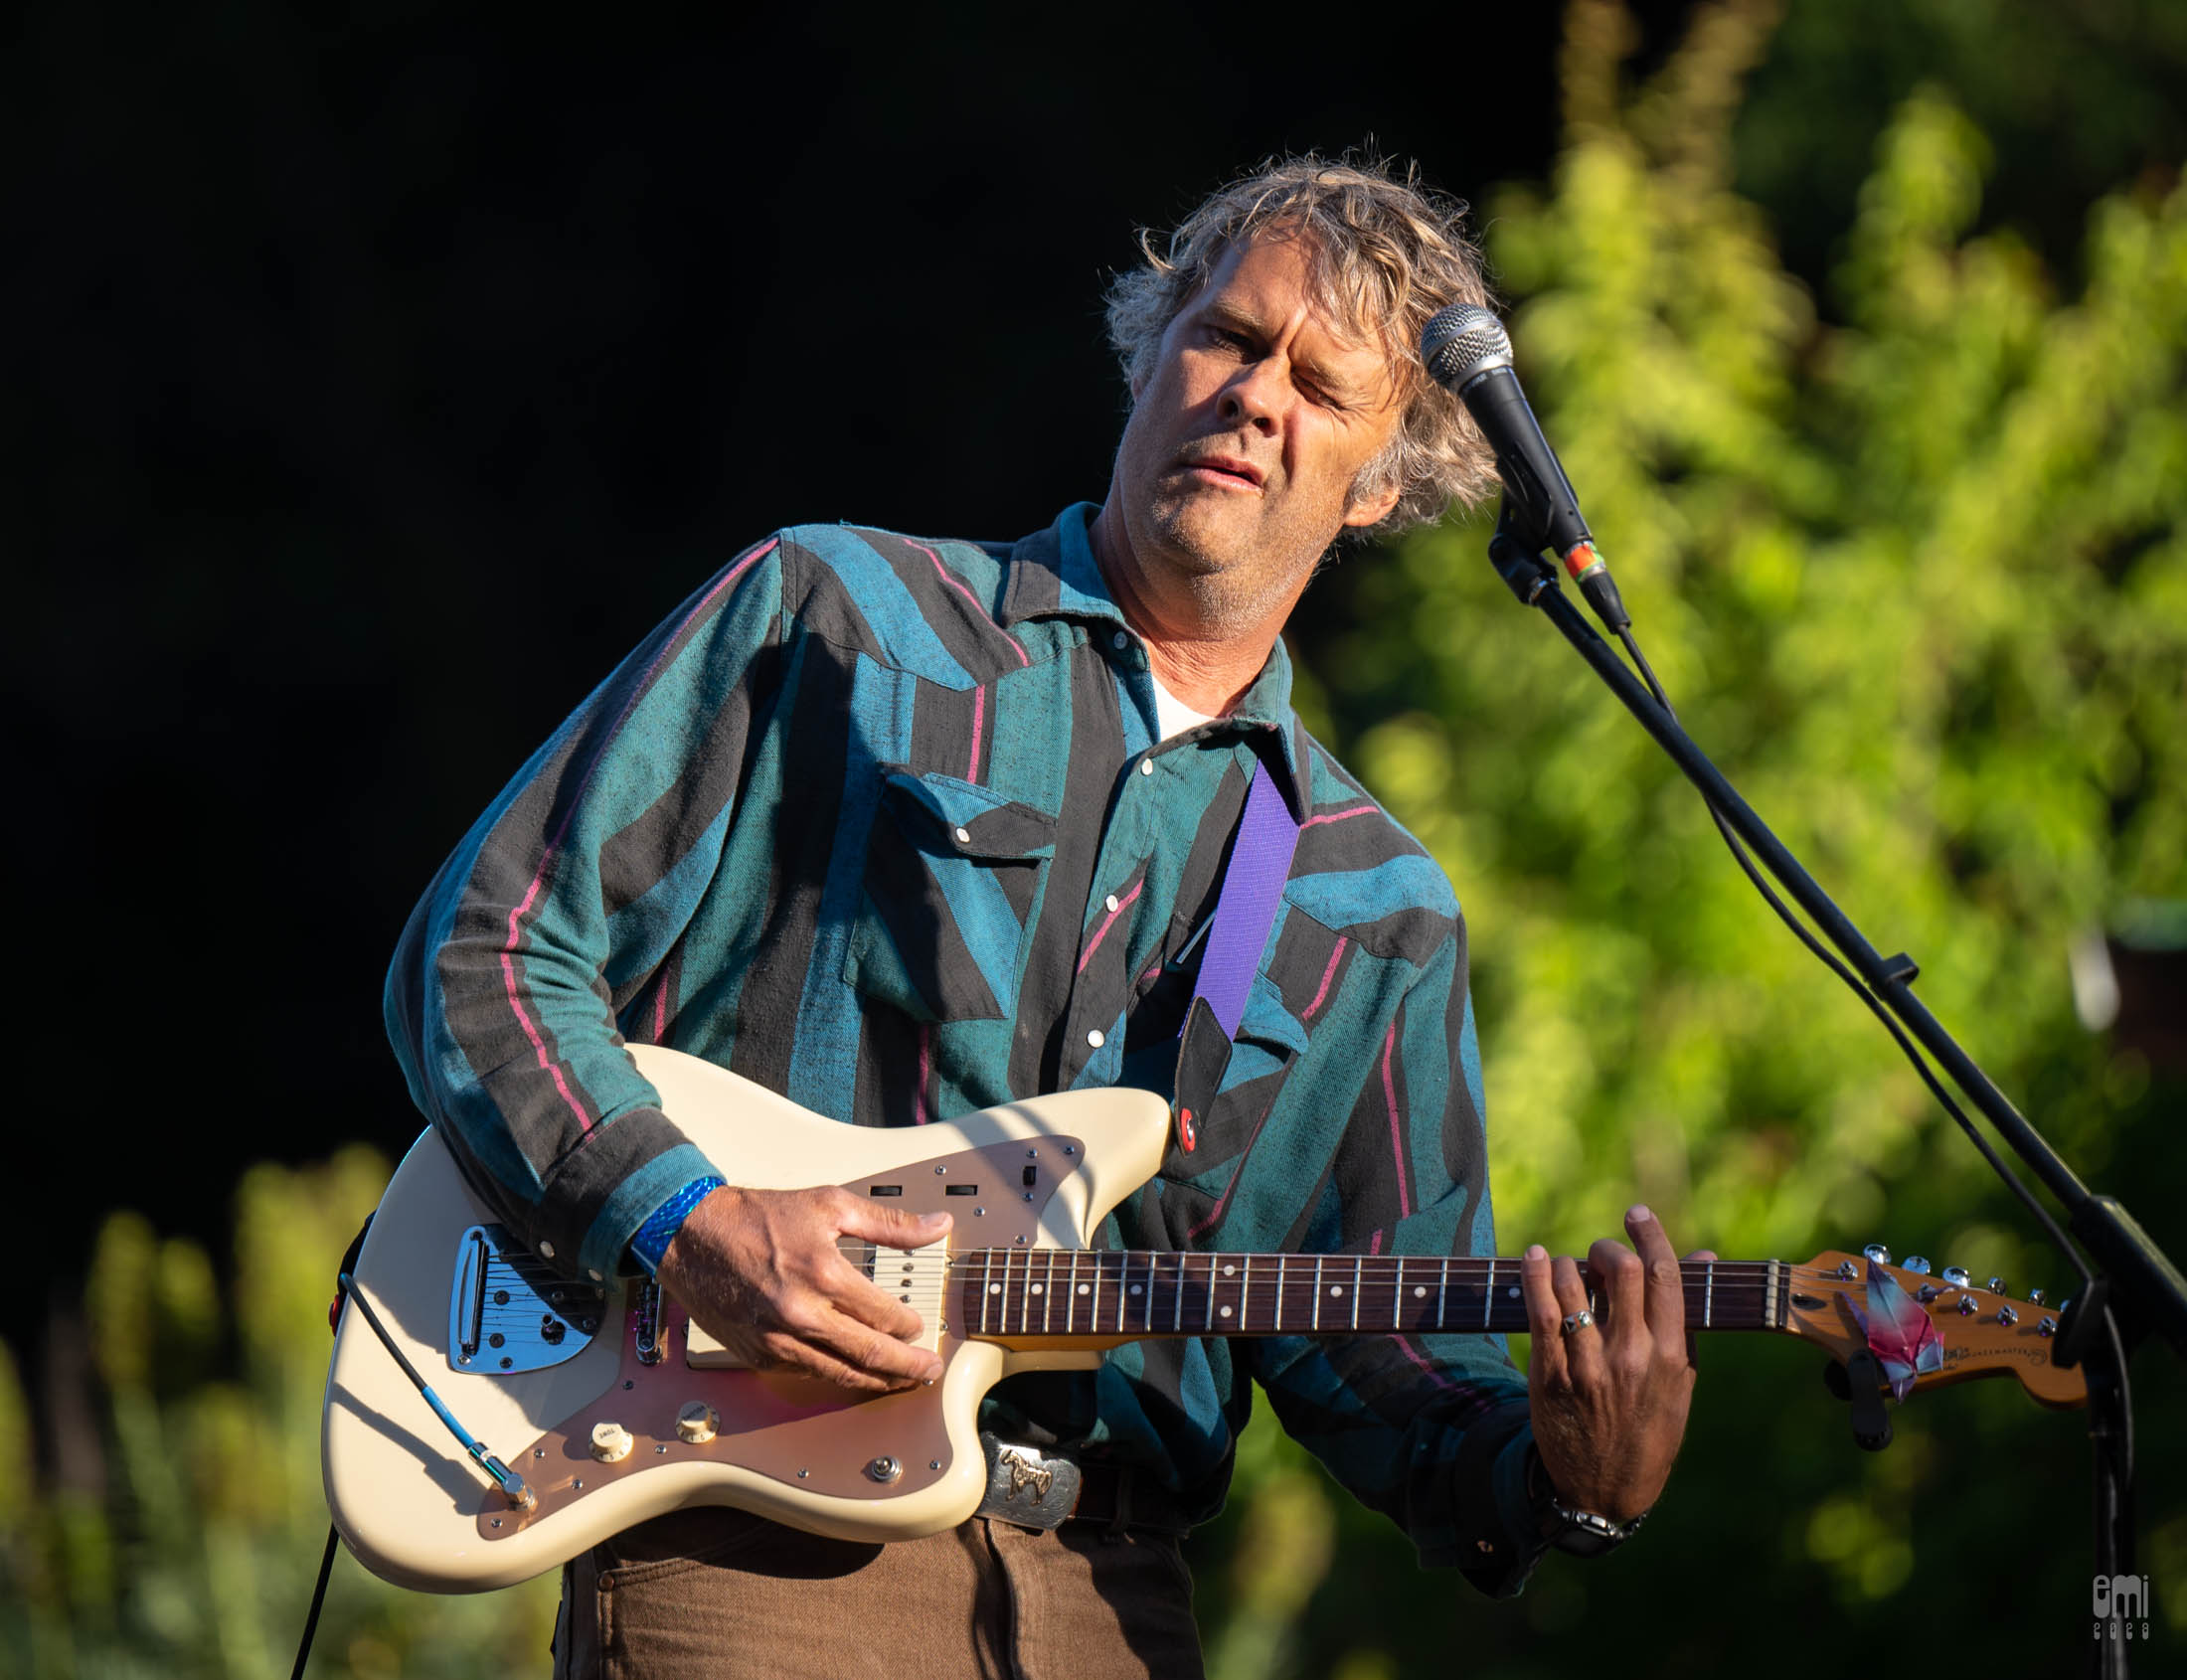 2023.5.20 HIPNIC XIV - LITTLE WINGS at Fernwood, Campground and Resort Big Sur CA. photo by emi